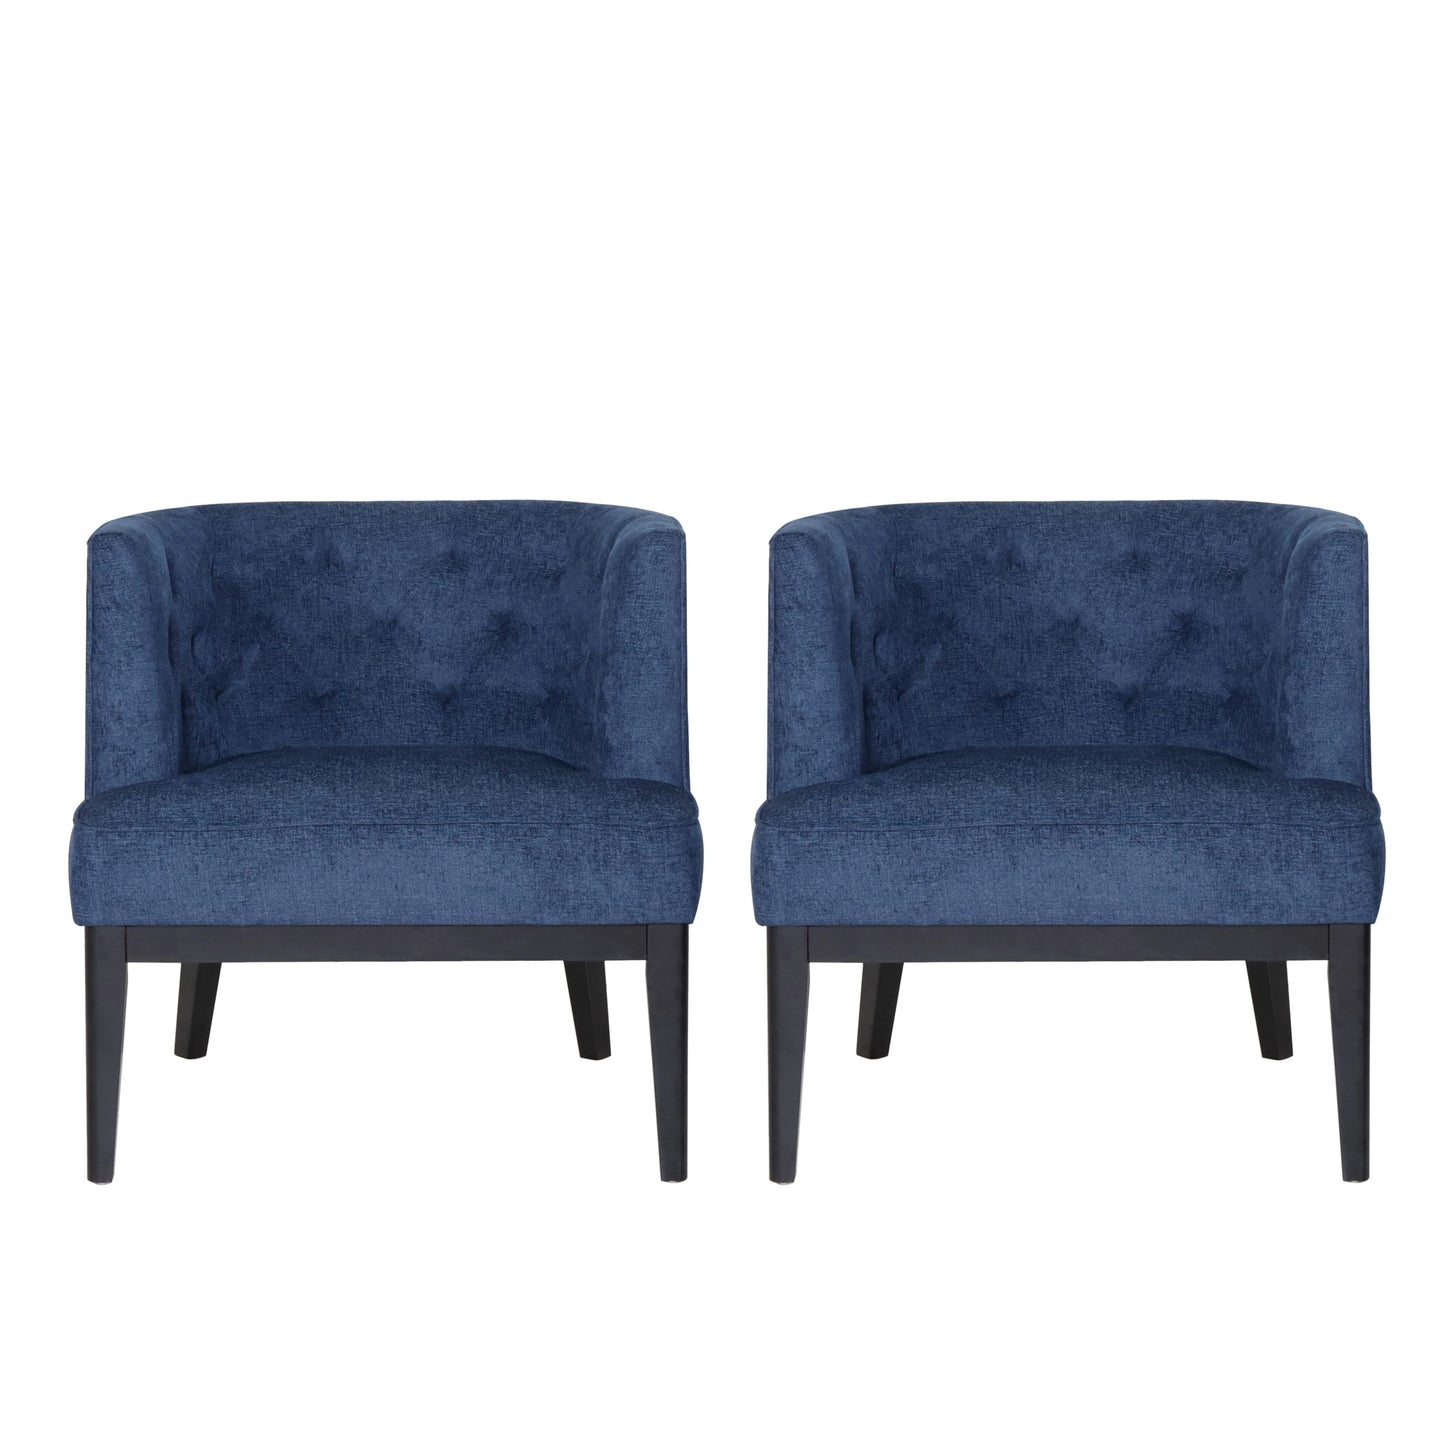 Evans Contemporary Fabric Tufted Accent Chairs, Set of 2